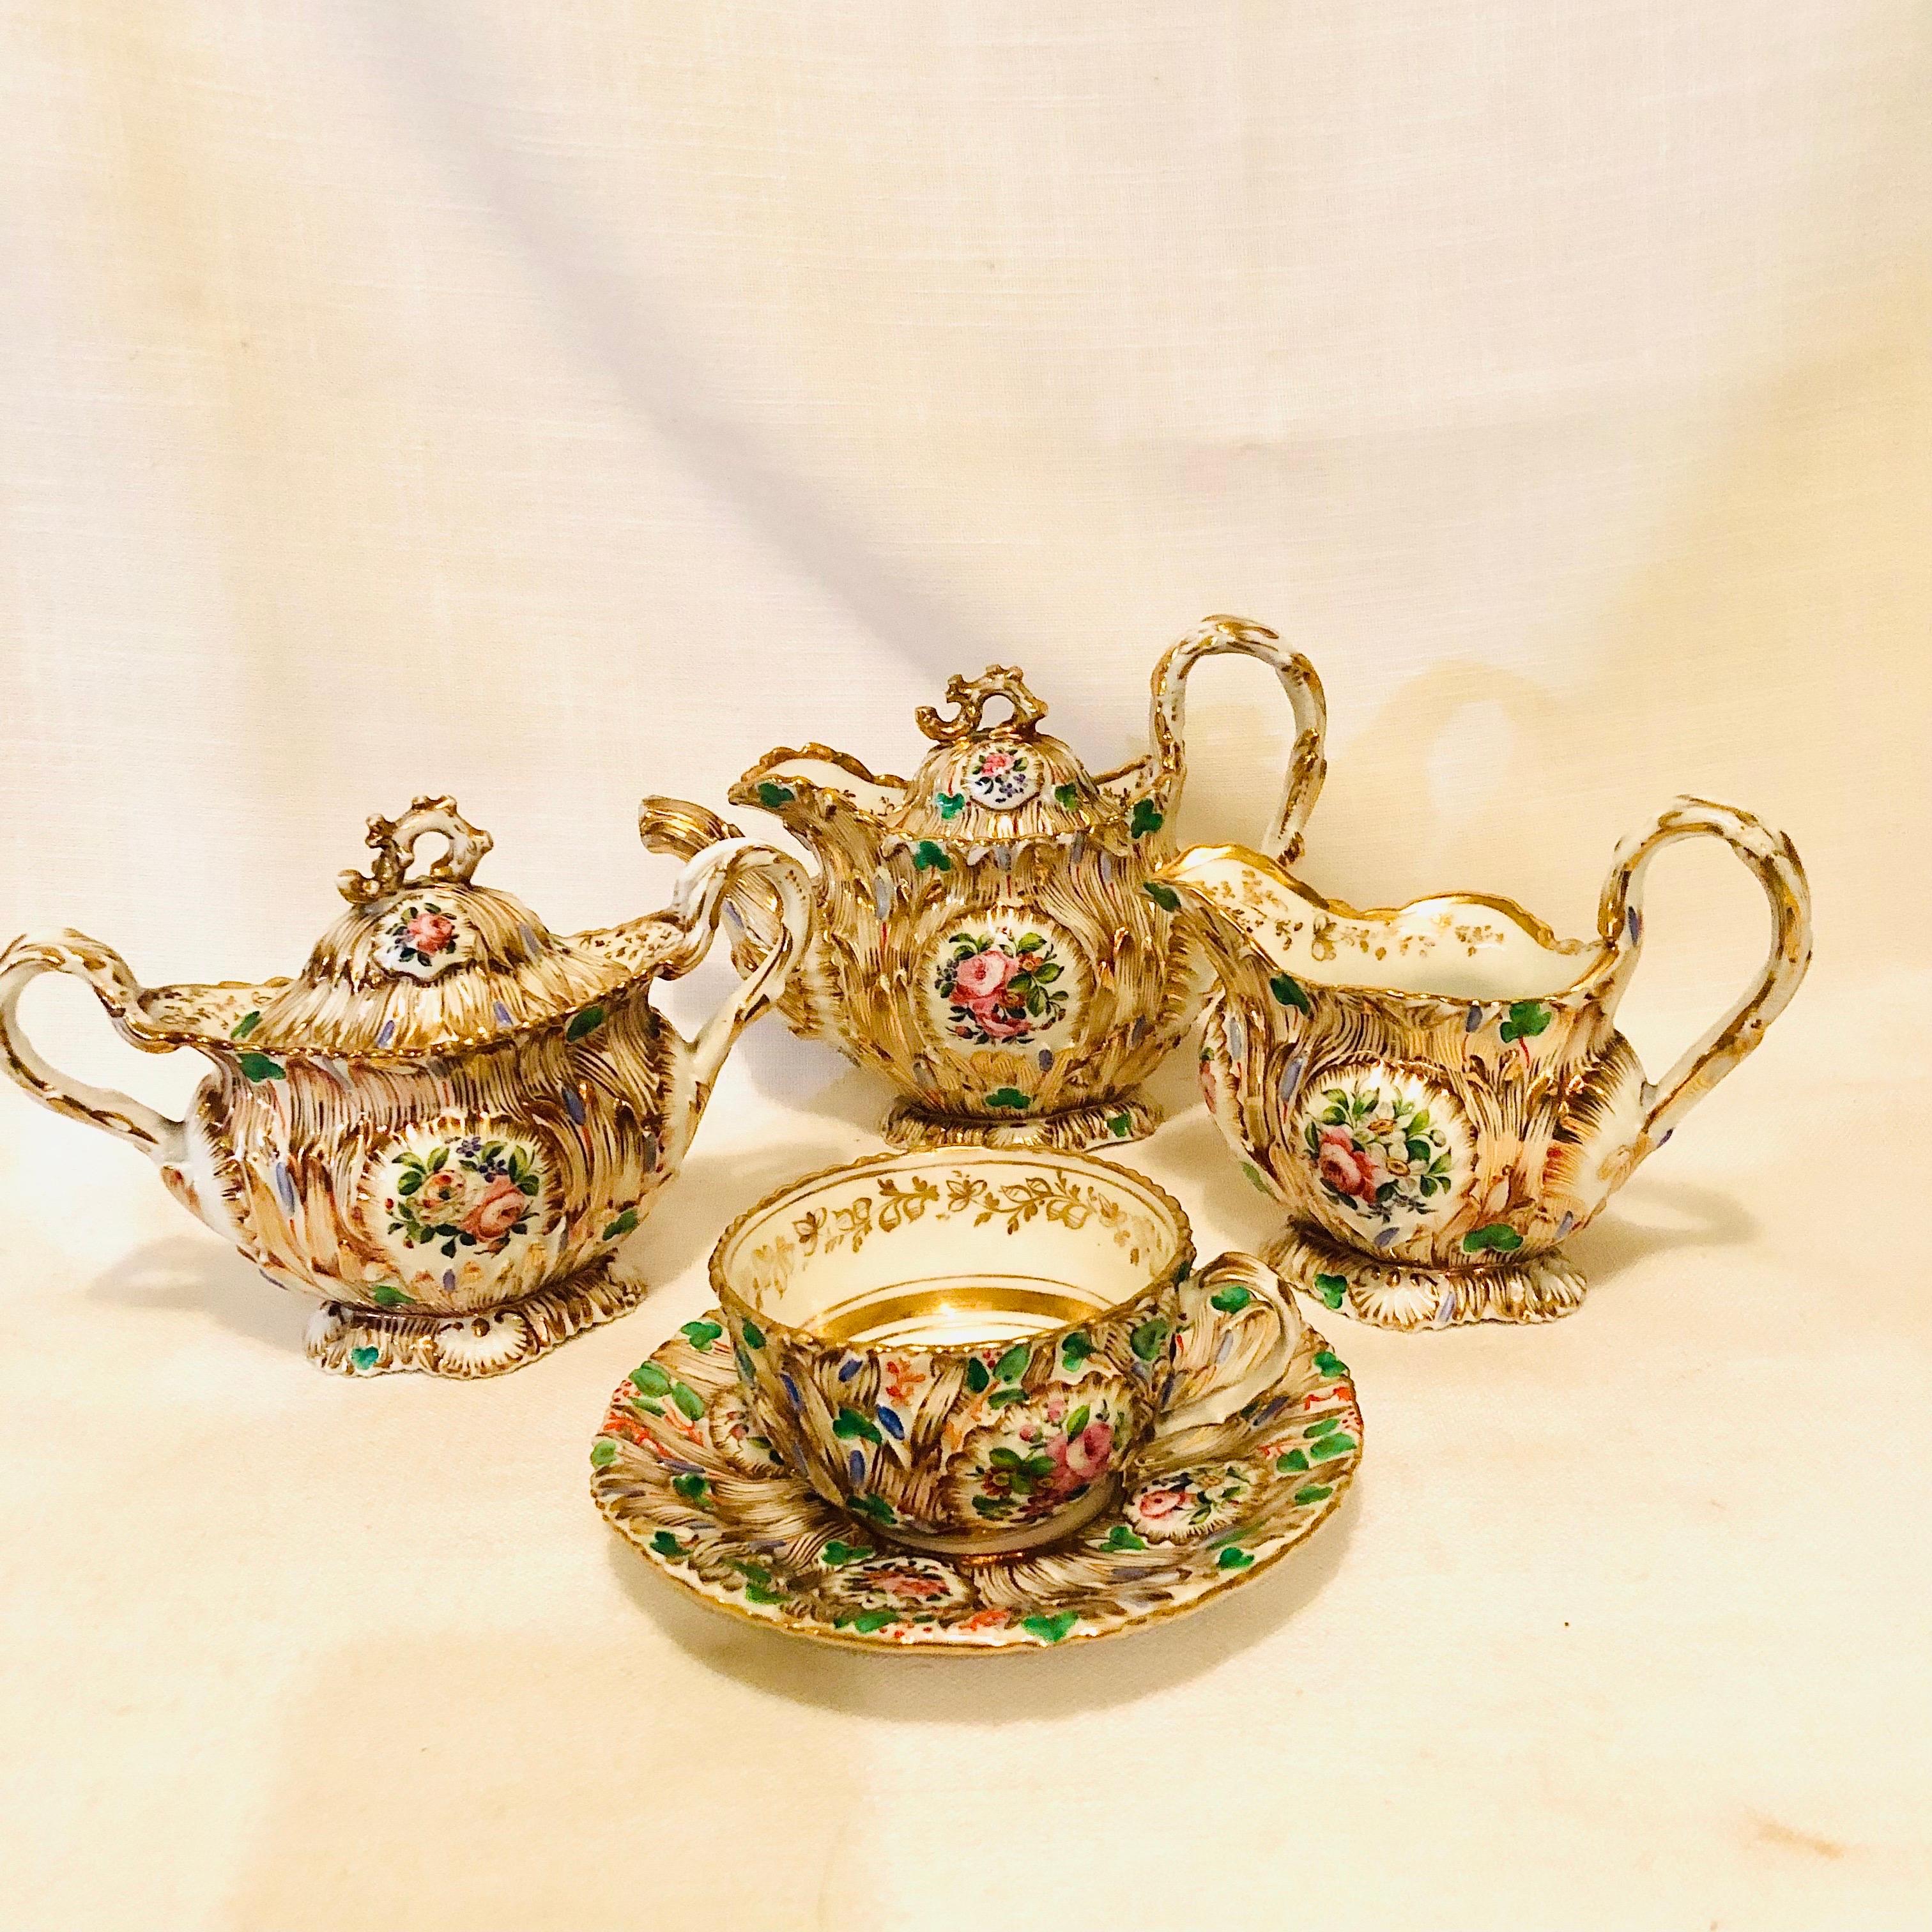 This is a fabulous Jacob Petit Old Paris Porcelain solitaire museum quality tea set. It is profusely decorated with gold, cartouches of flowers and many colors in the rococo style, which is a delight for the eyes. This tea set dates back to the